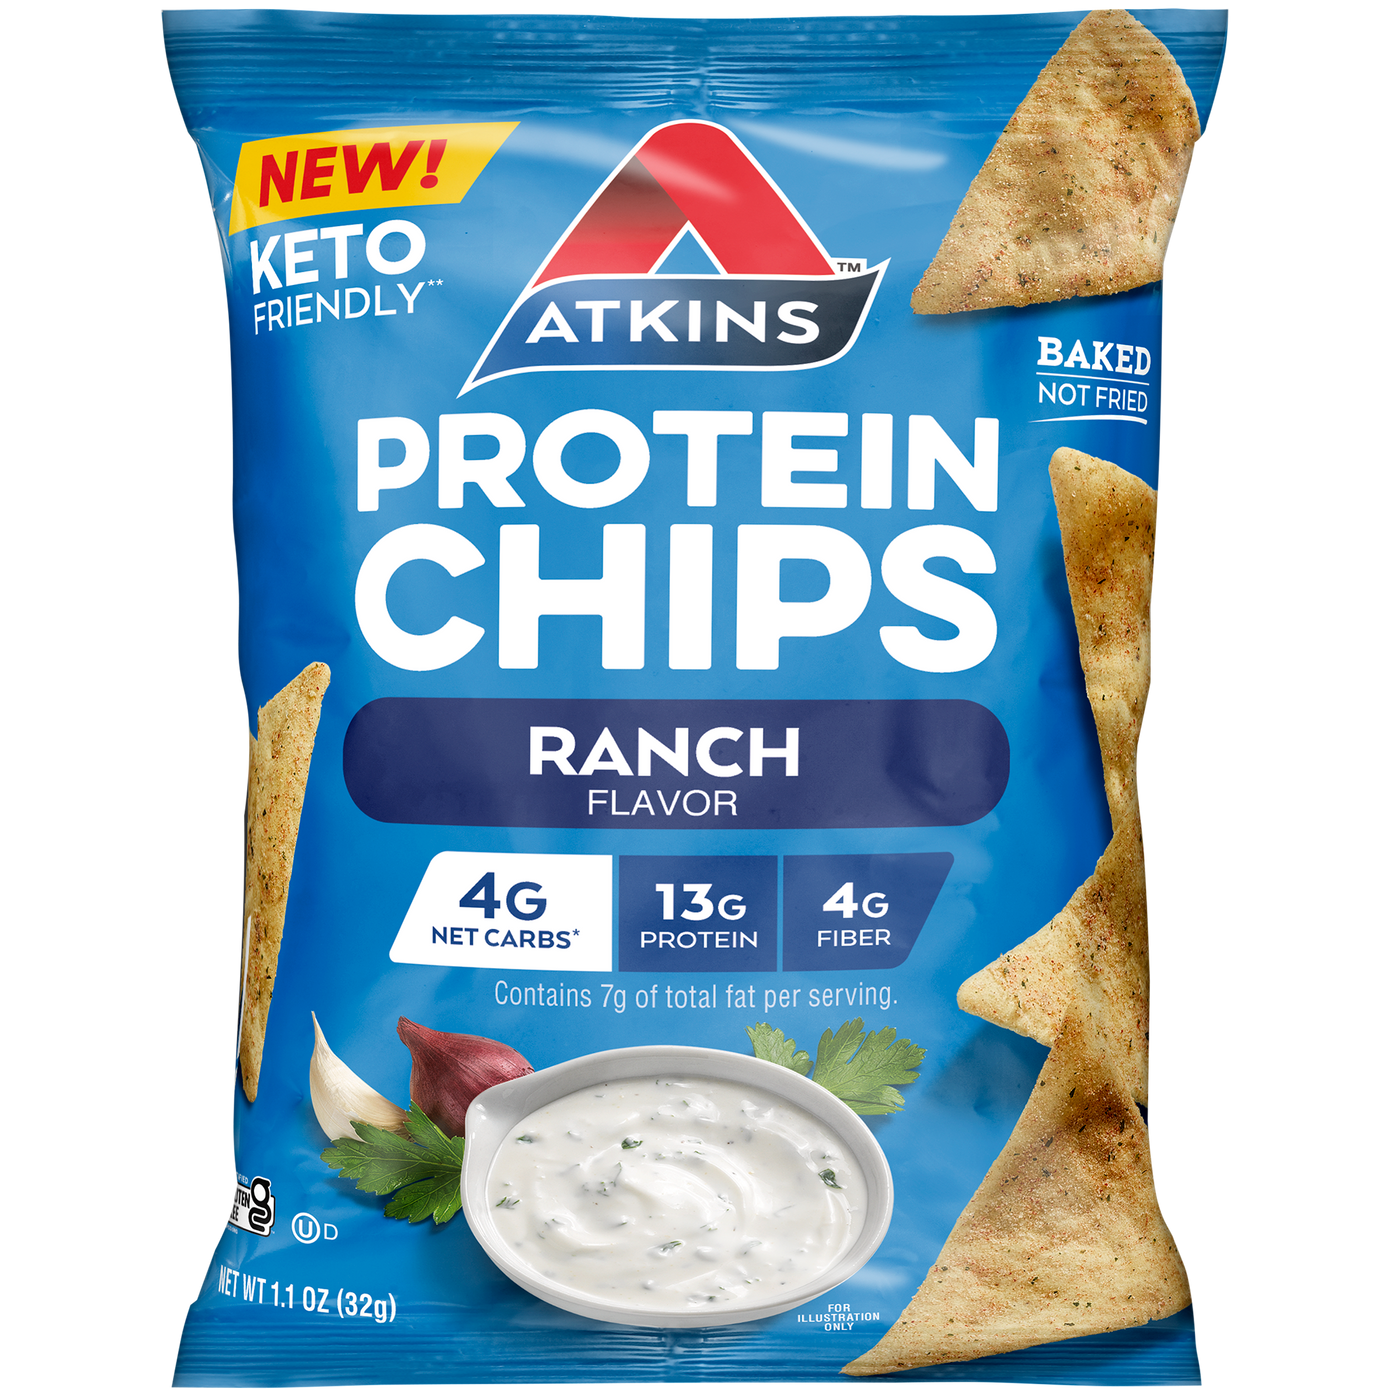 Ranch Snack Protein Chips